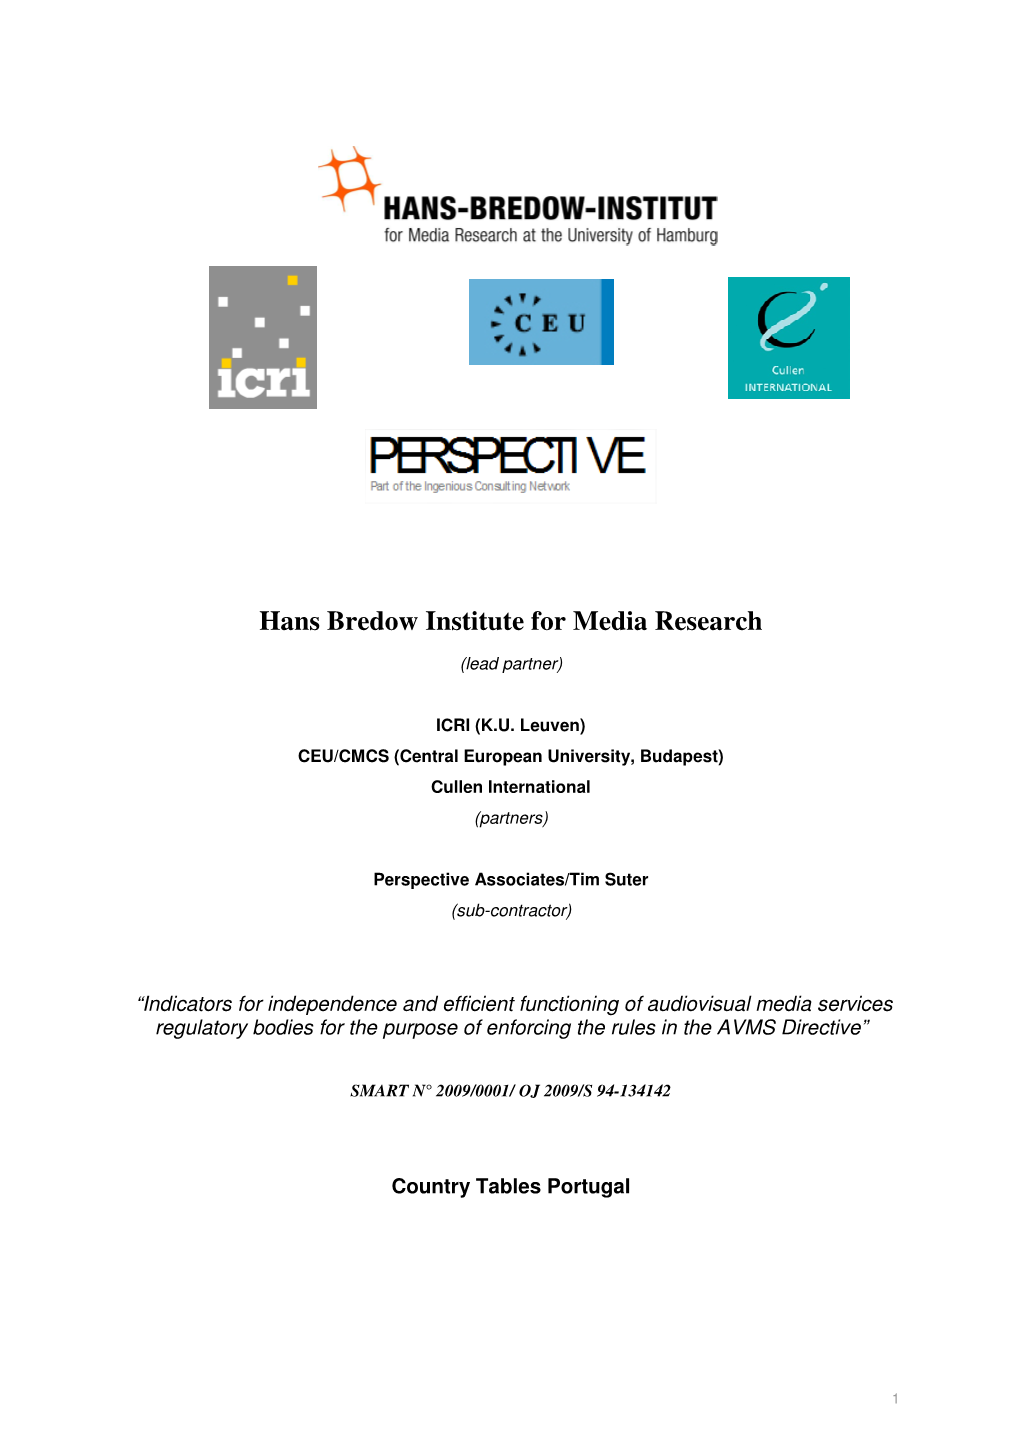 Hans Bredow Institute for Media Research